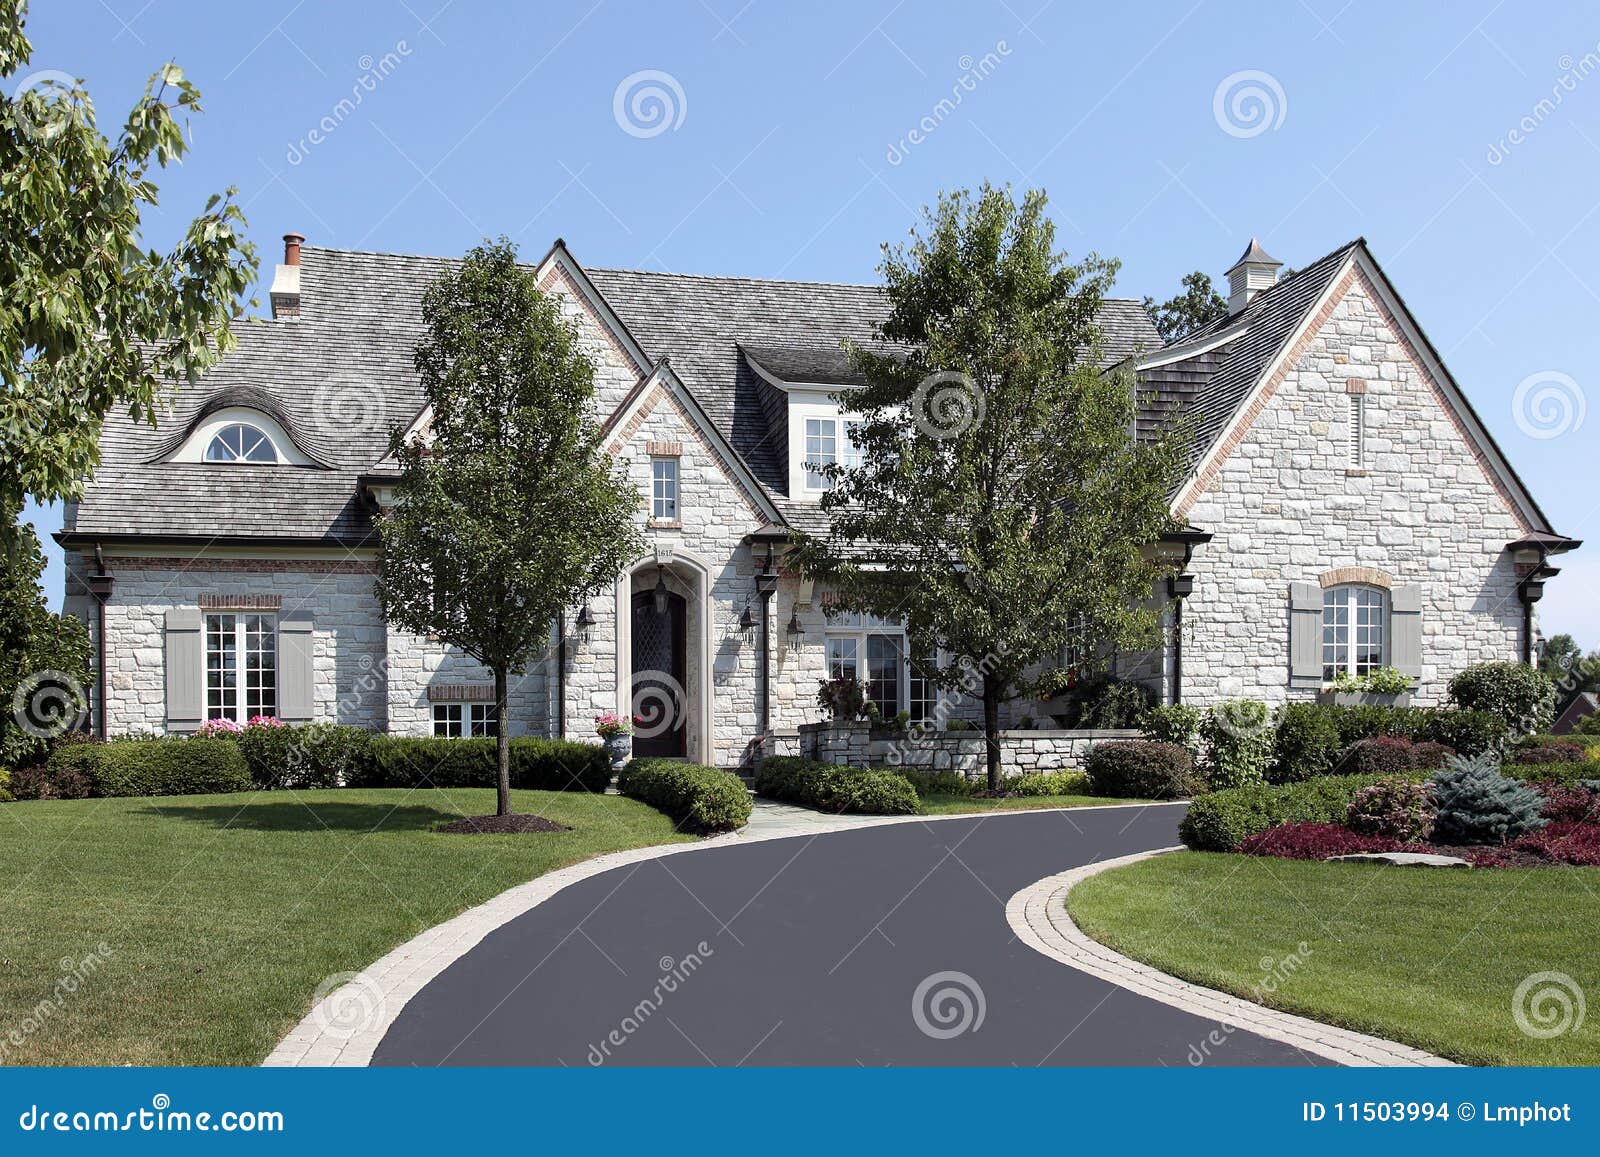 luxury stone home with circular driveway